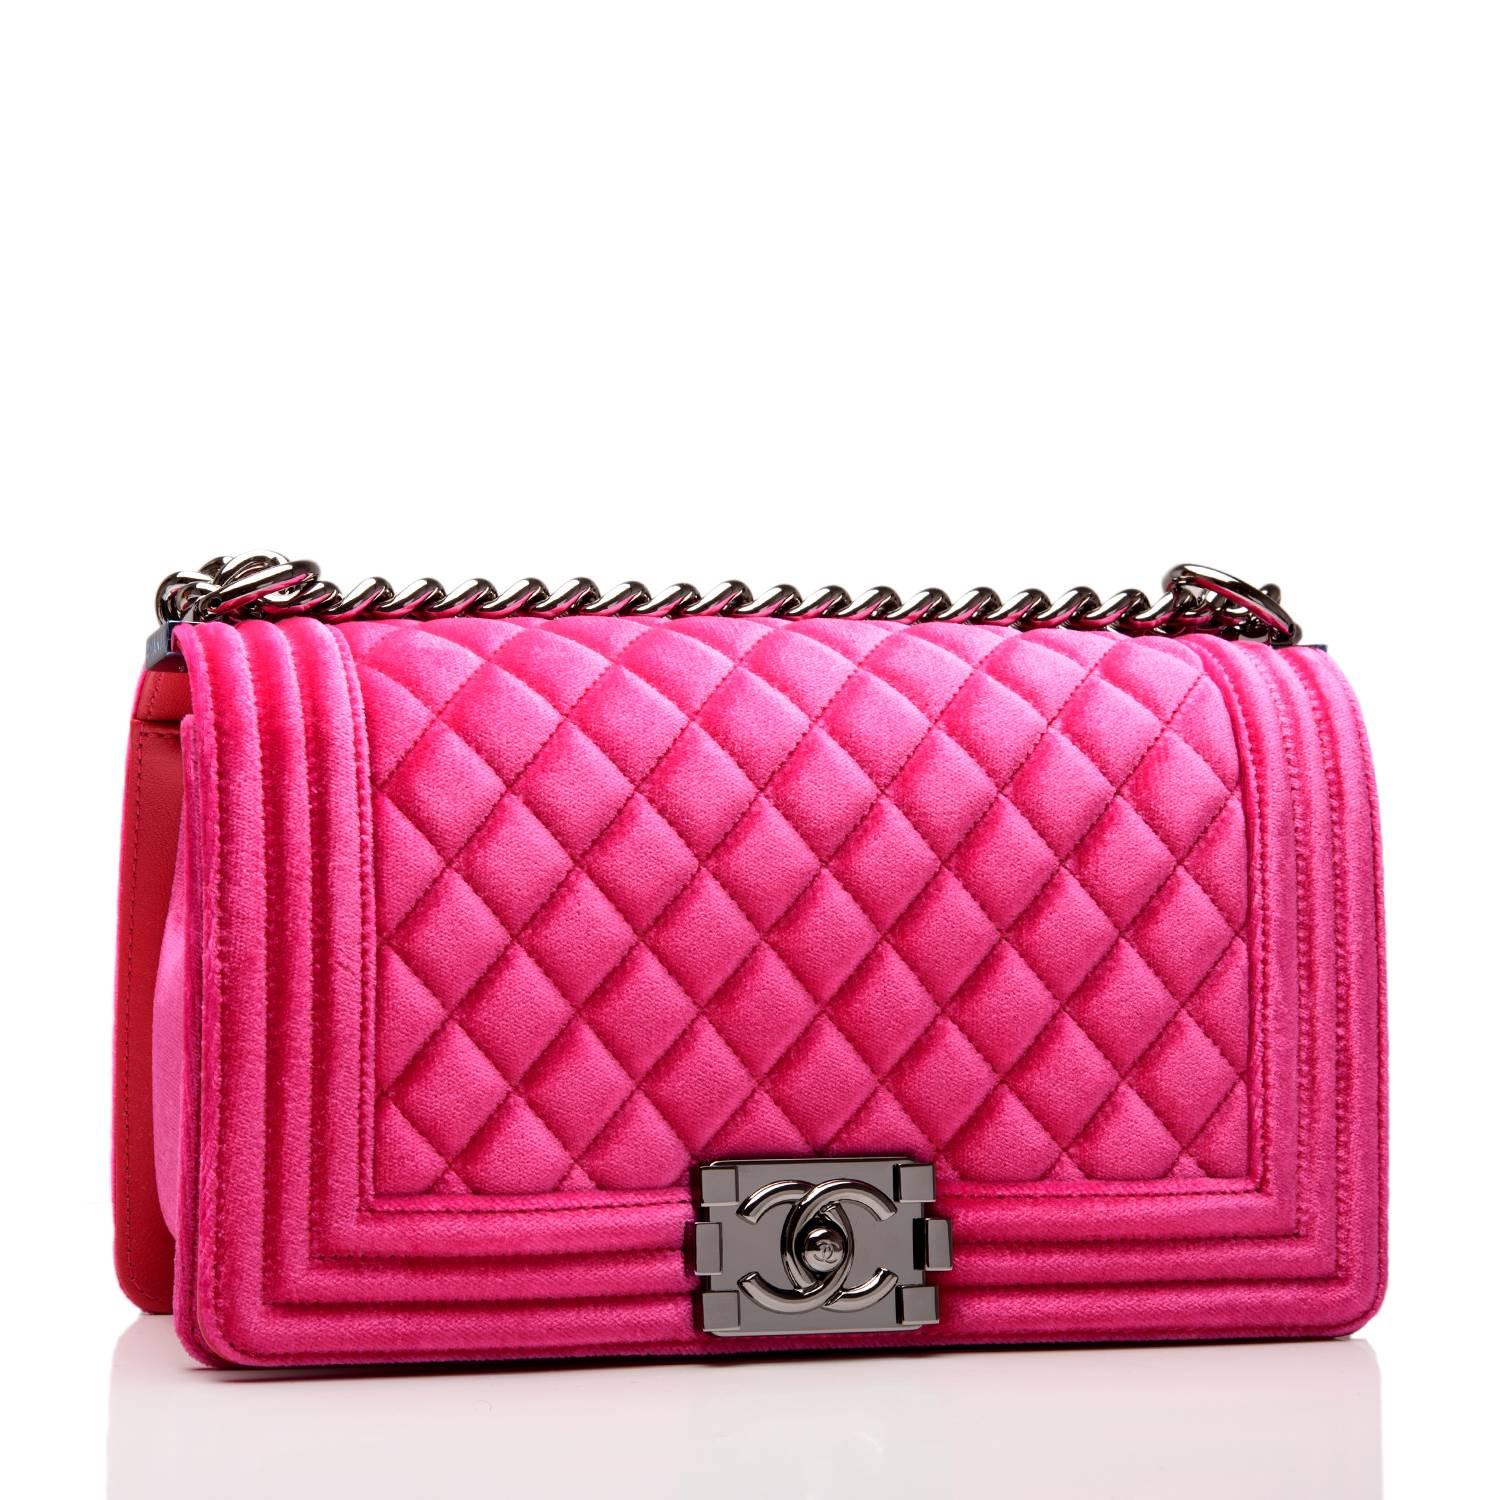 Chanel Medium Boy bag of fuchsia velvet accented by ruthenium hardware.

The bag features a full front flap with CC Le Boy push lock closure and ruthenium chain link and fuchsia leather padded shoulder/crossbody strap.

The open interior is